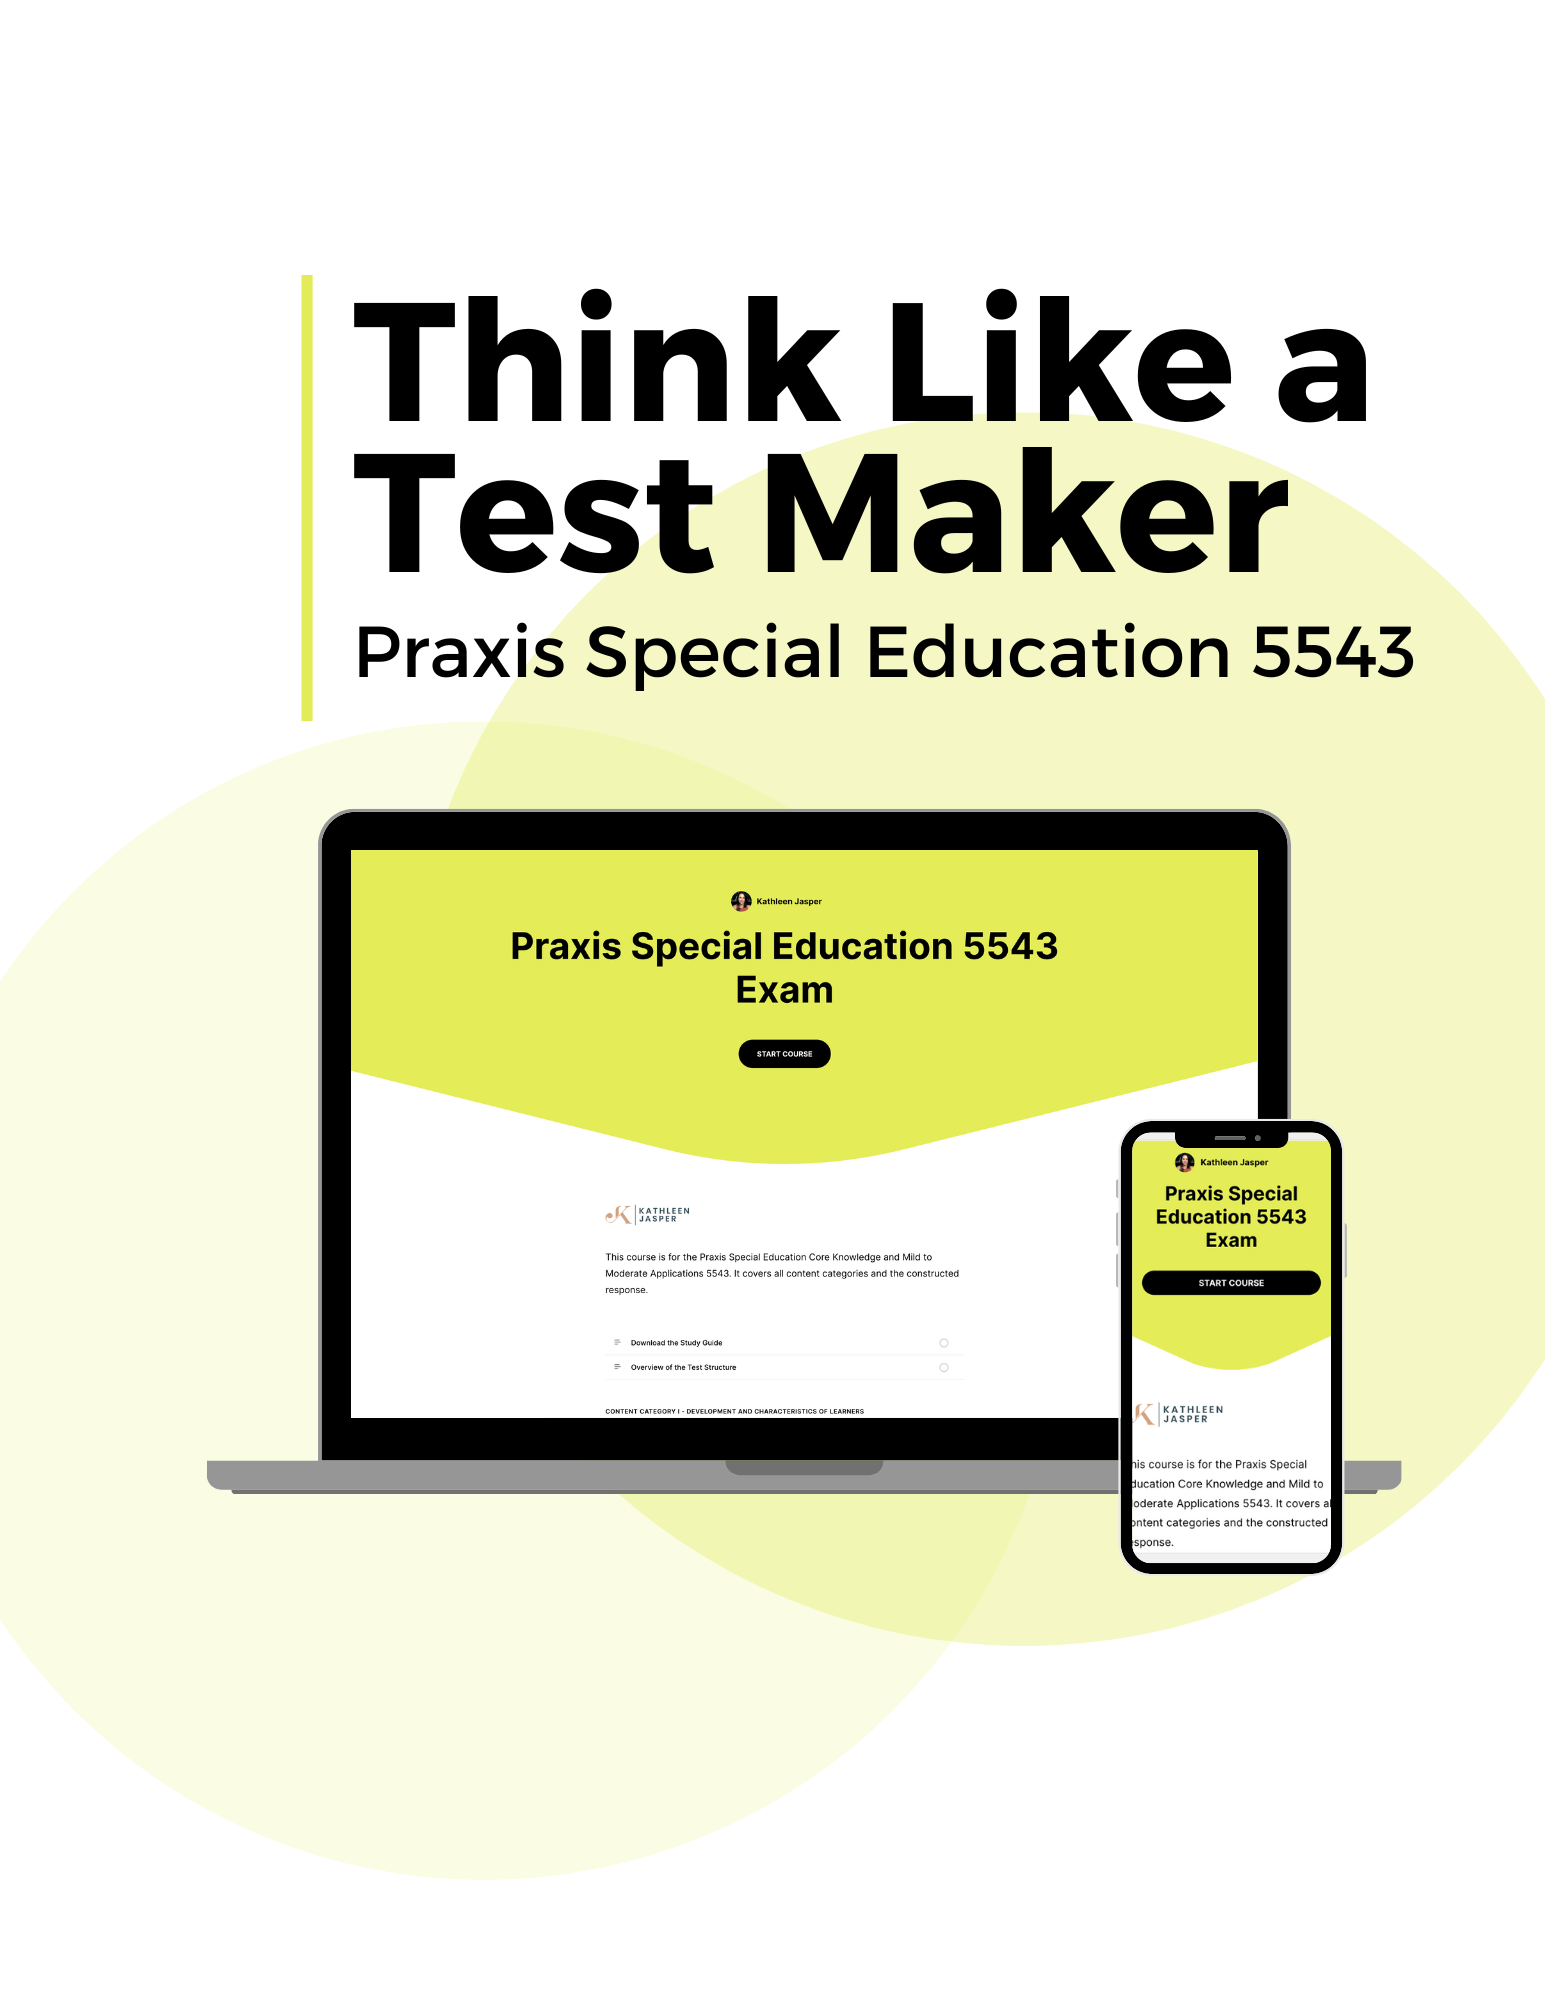 Think like a test maker praxis special education 5543